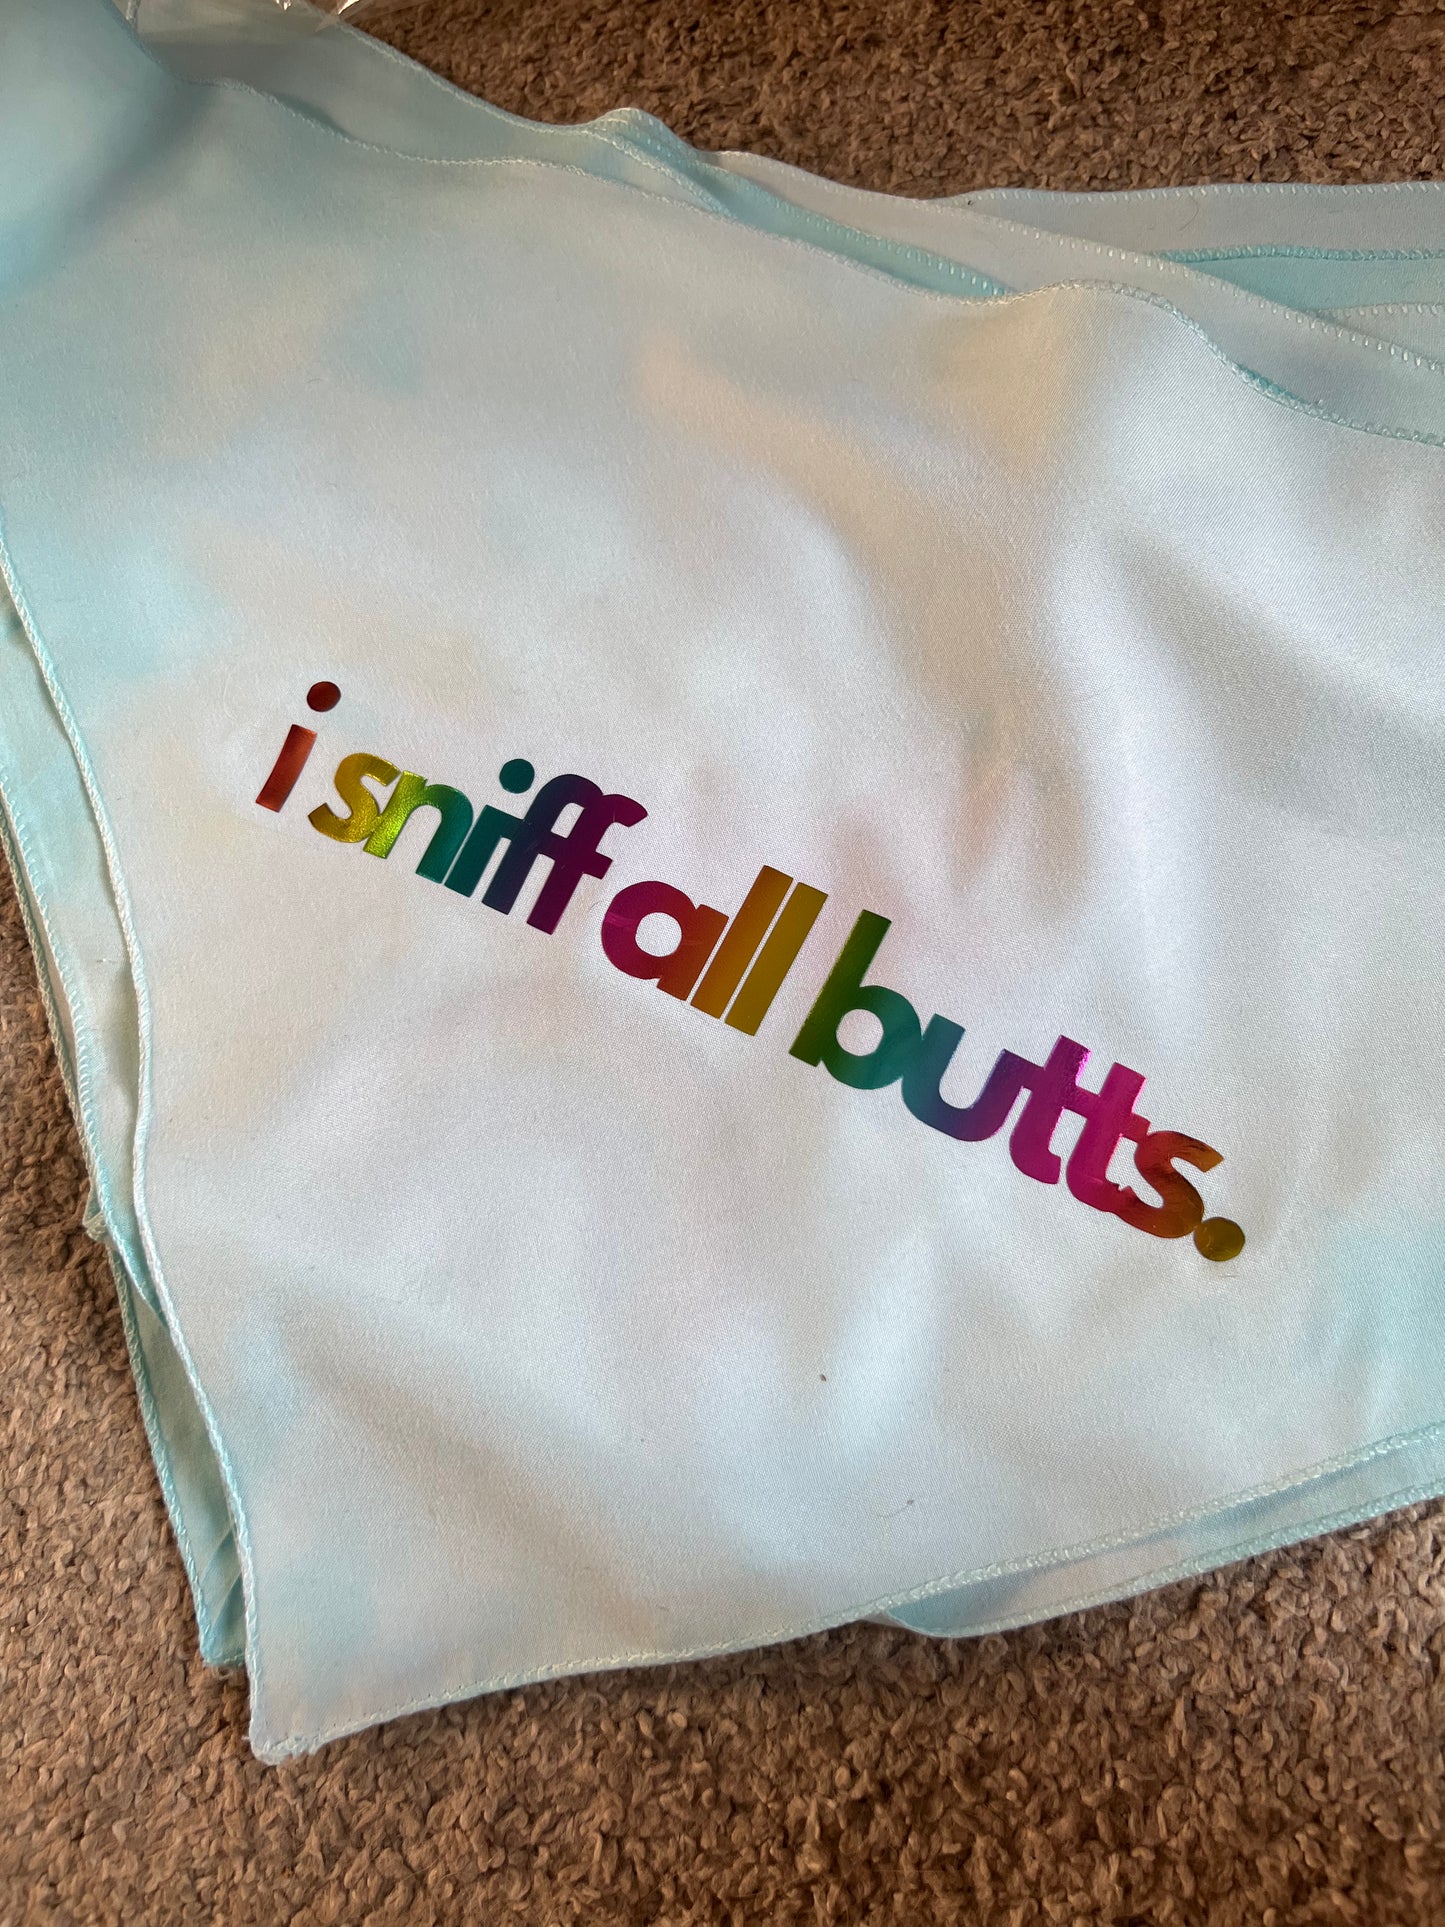 The “i sniff all butts” Pride Bandana!